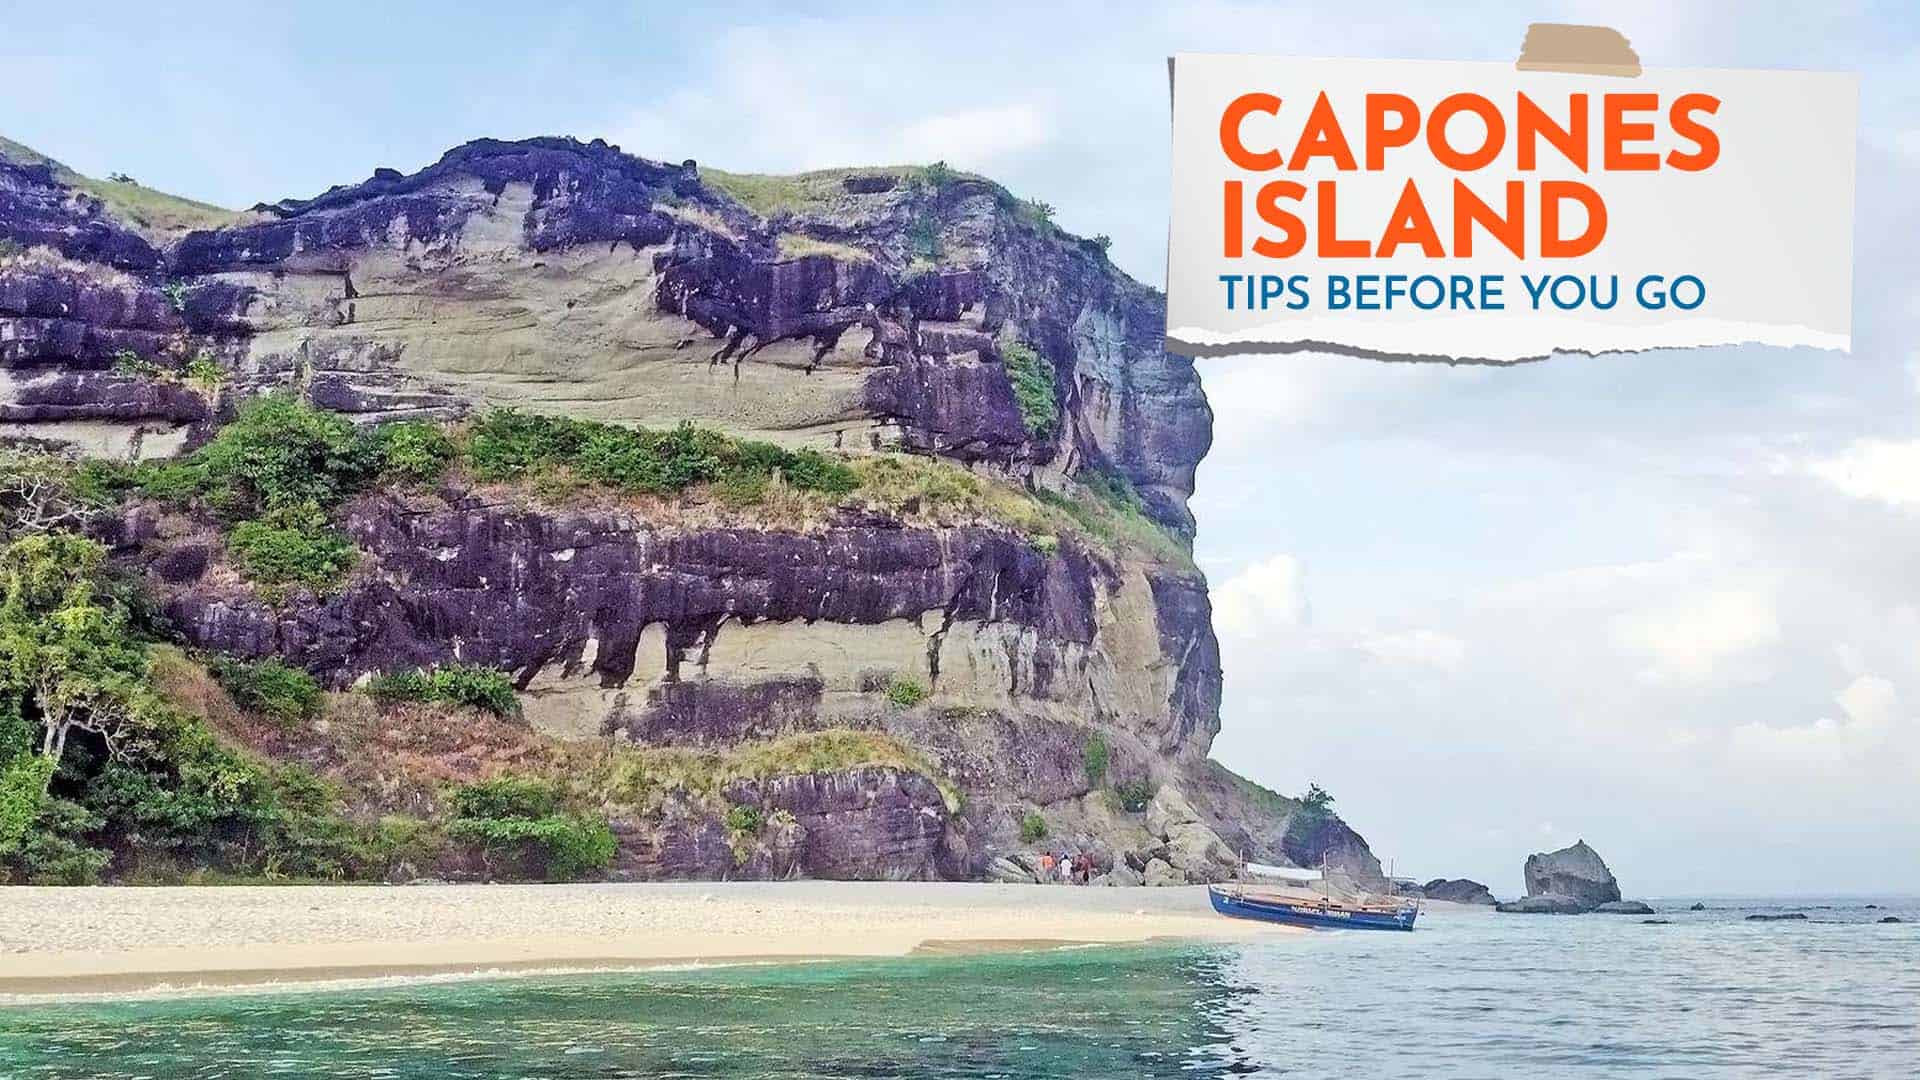 Capones Island Tips Before You Go